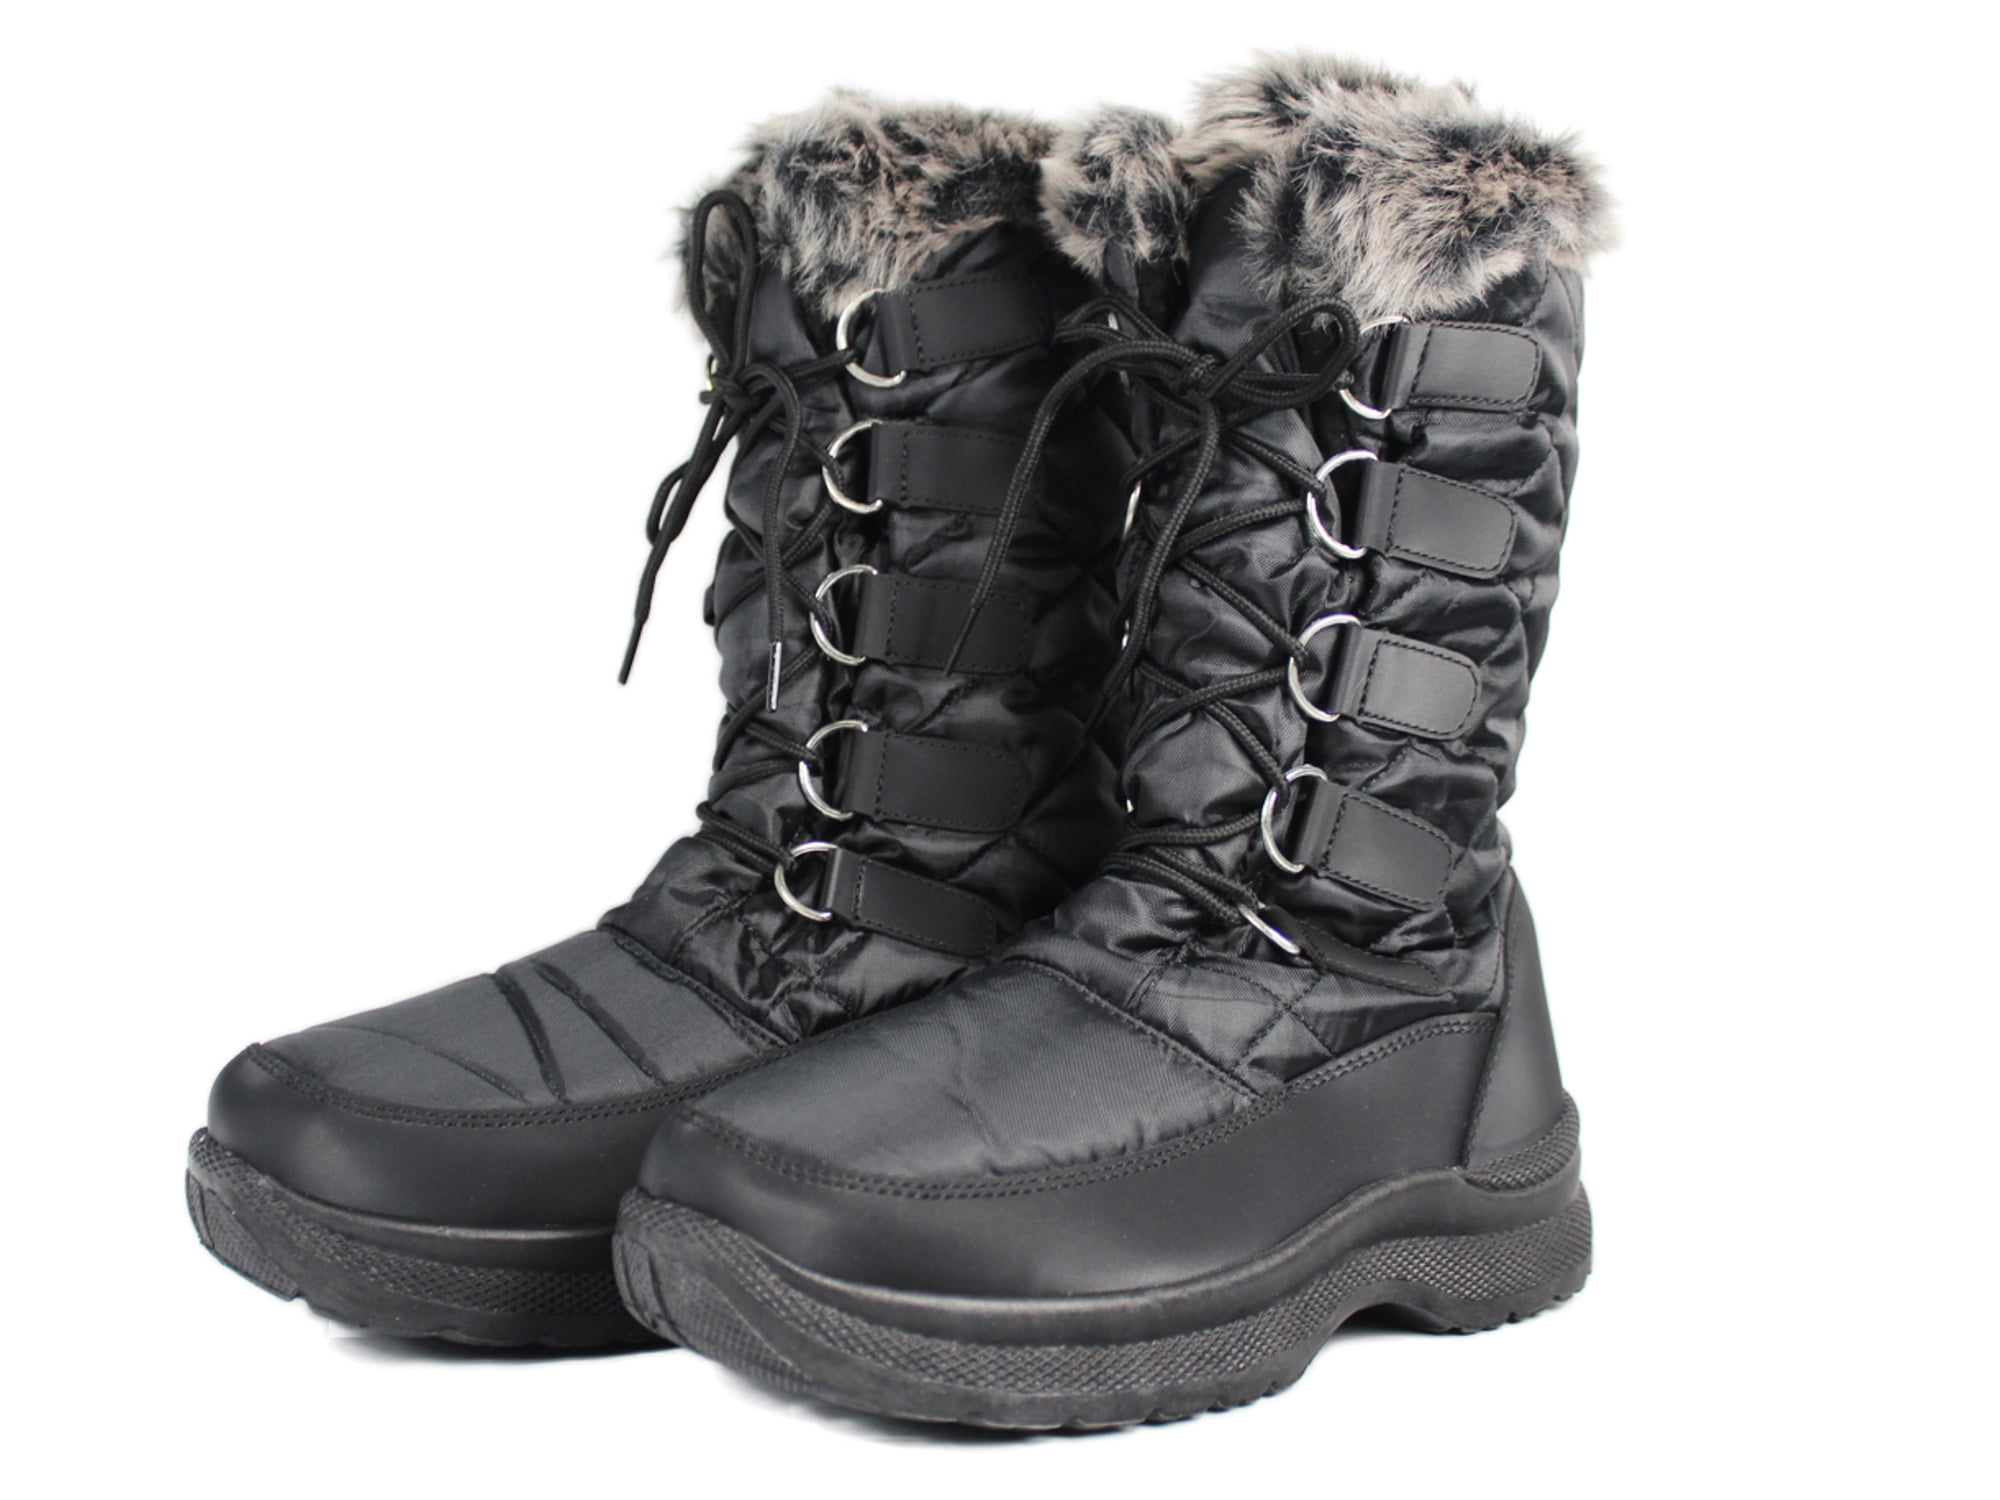 Womens Winter Snow Boots Mid-Calf Water Resistant Outdoor Warm Snow ...